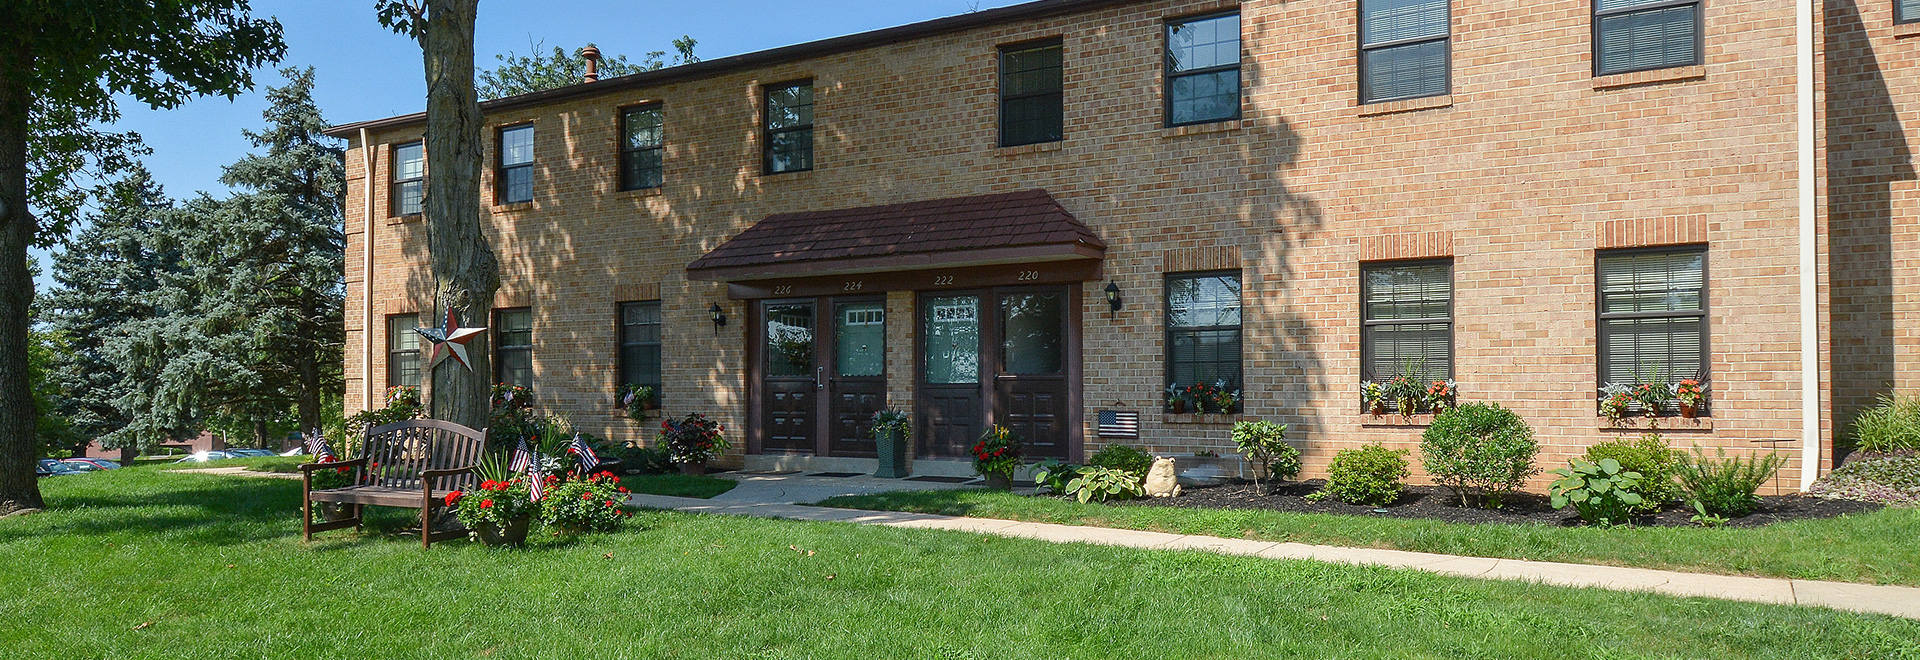 Apartments Near York Pa For Rent Now Manor Communities